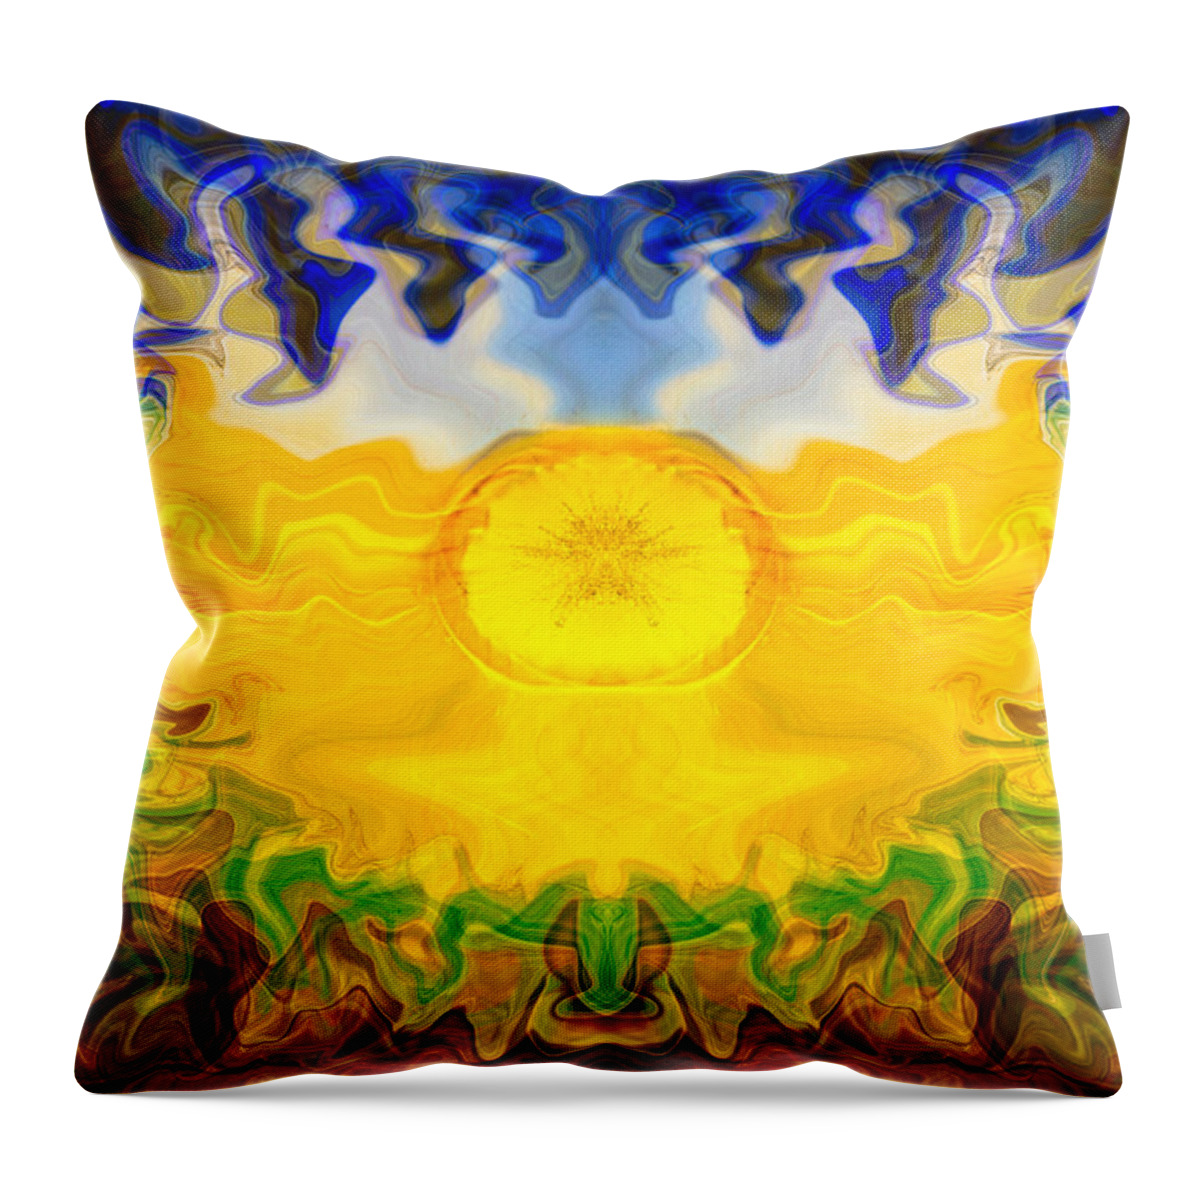 Brown Throw Pillow featuring the painting Pearlescent by Omaste Witkowski